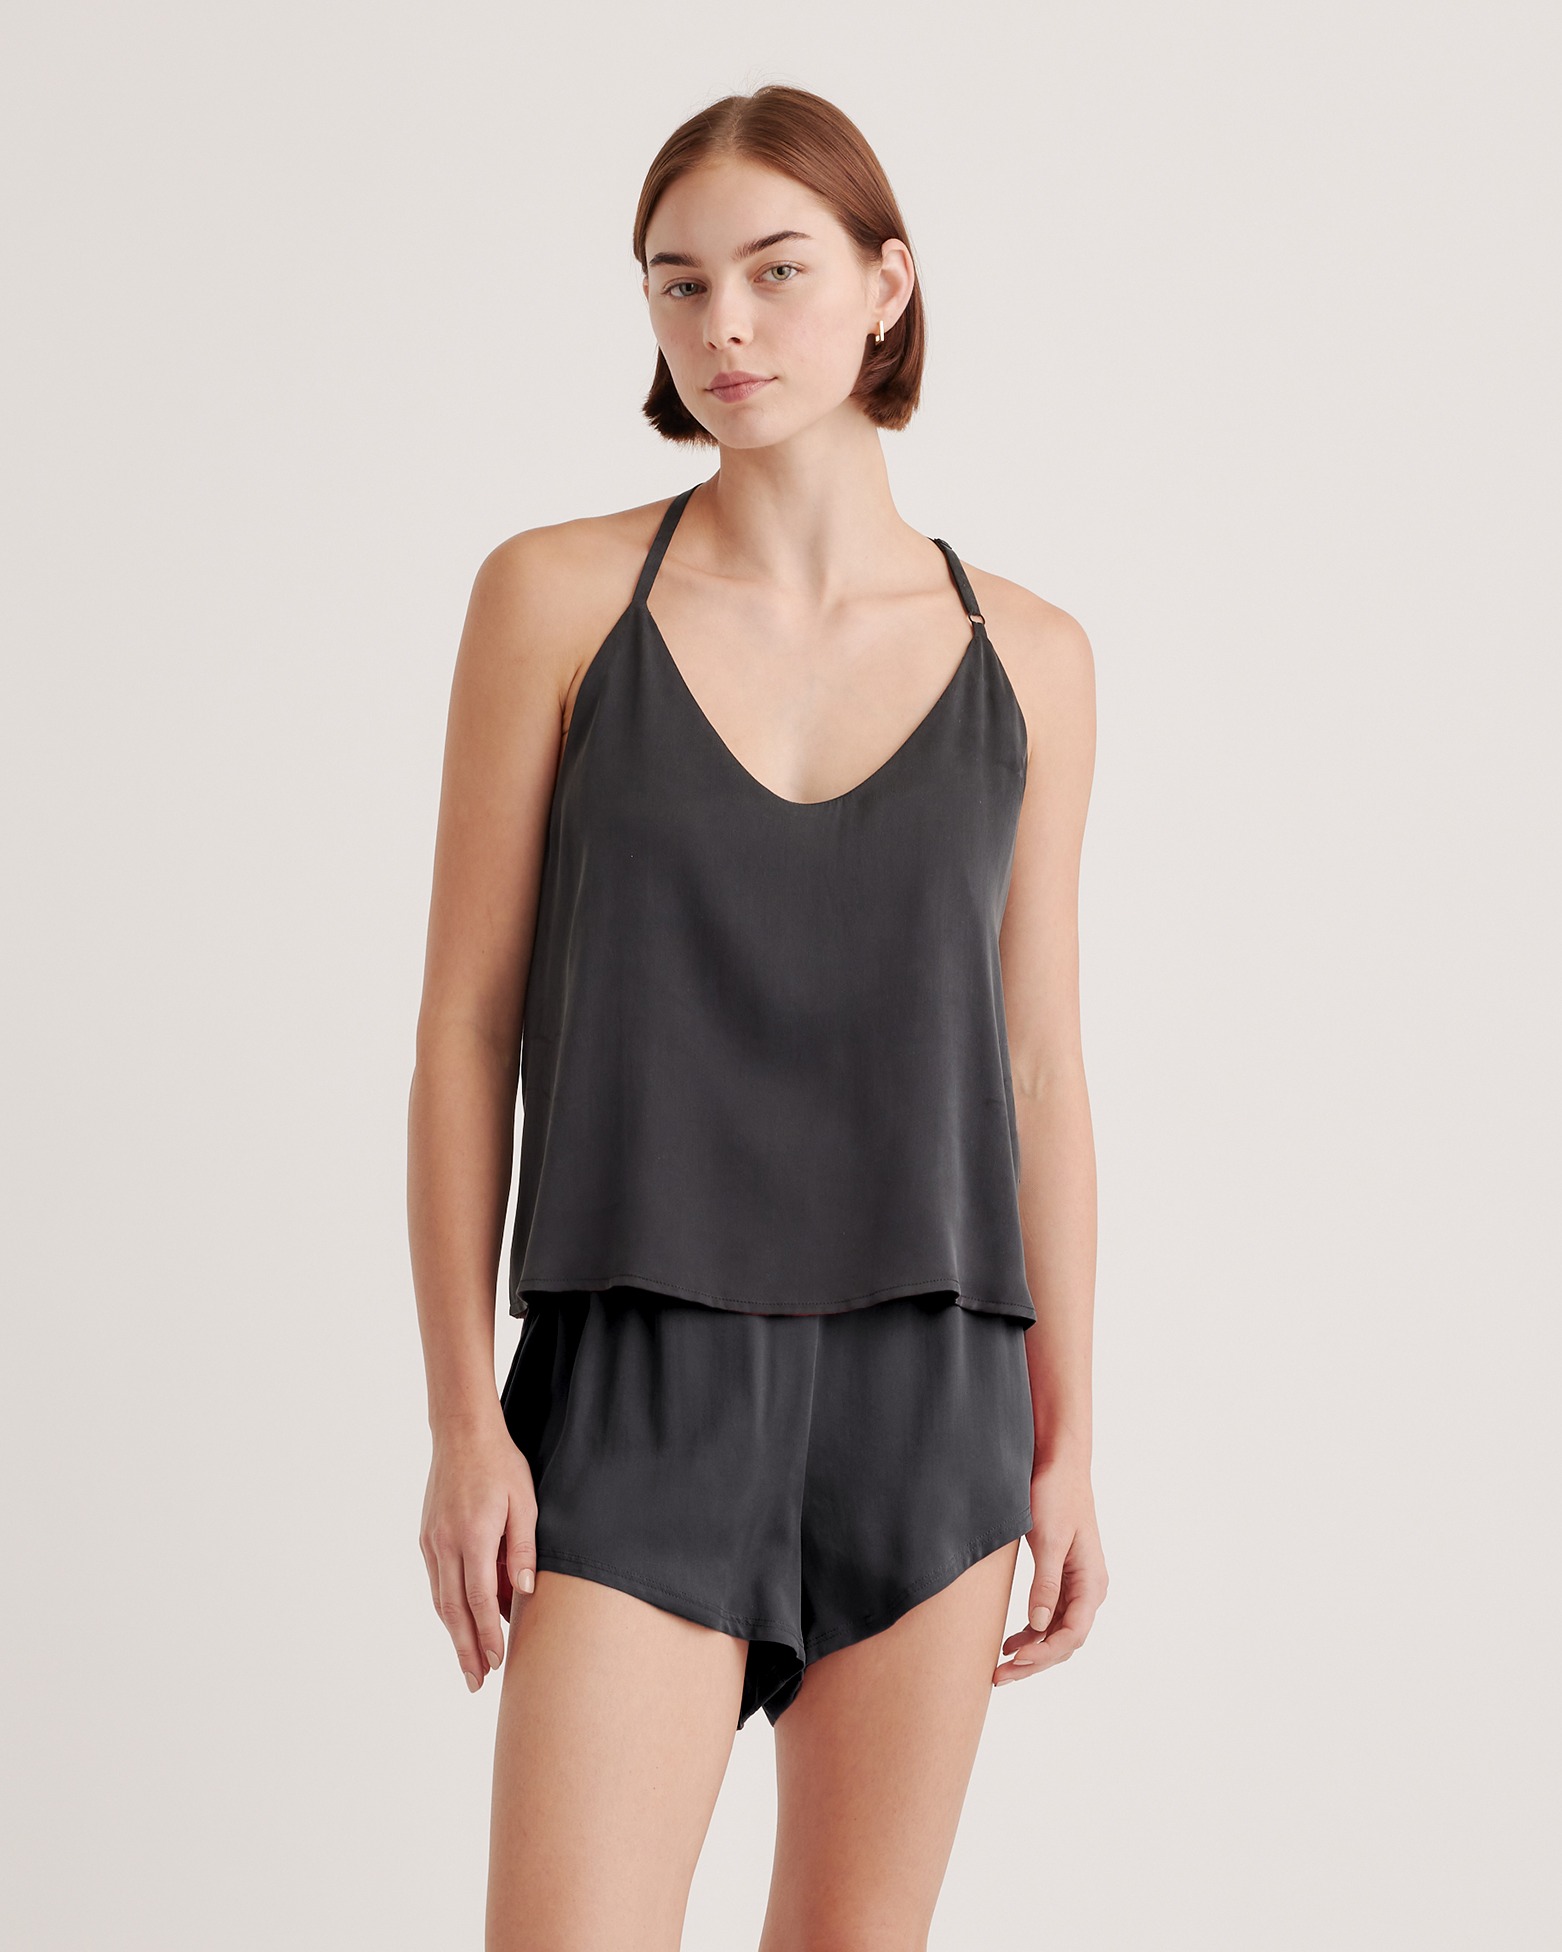 Washable 100% Mulberry Silk Pajama Camisole Top